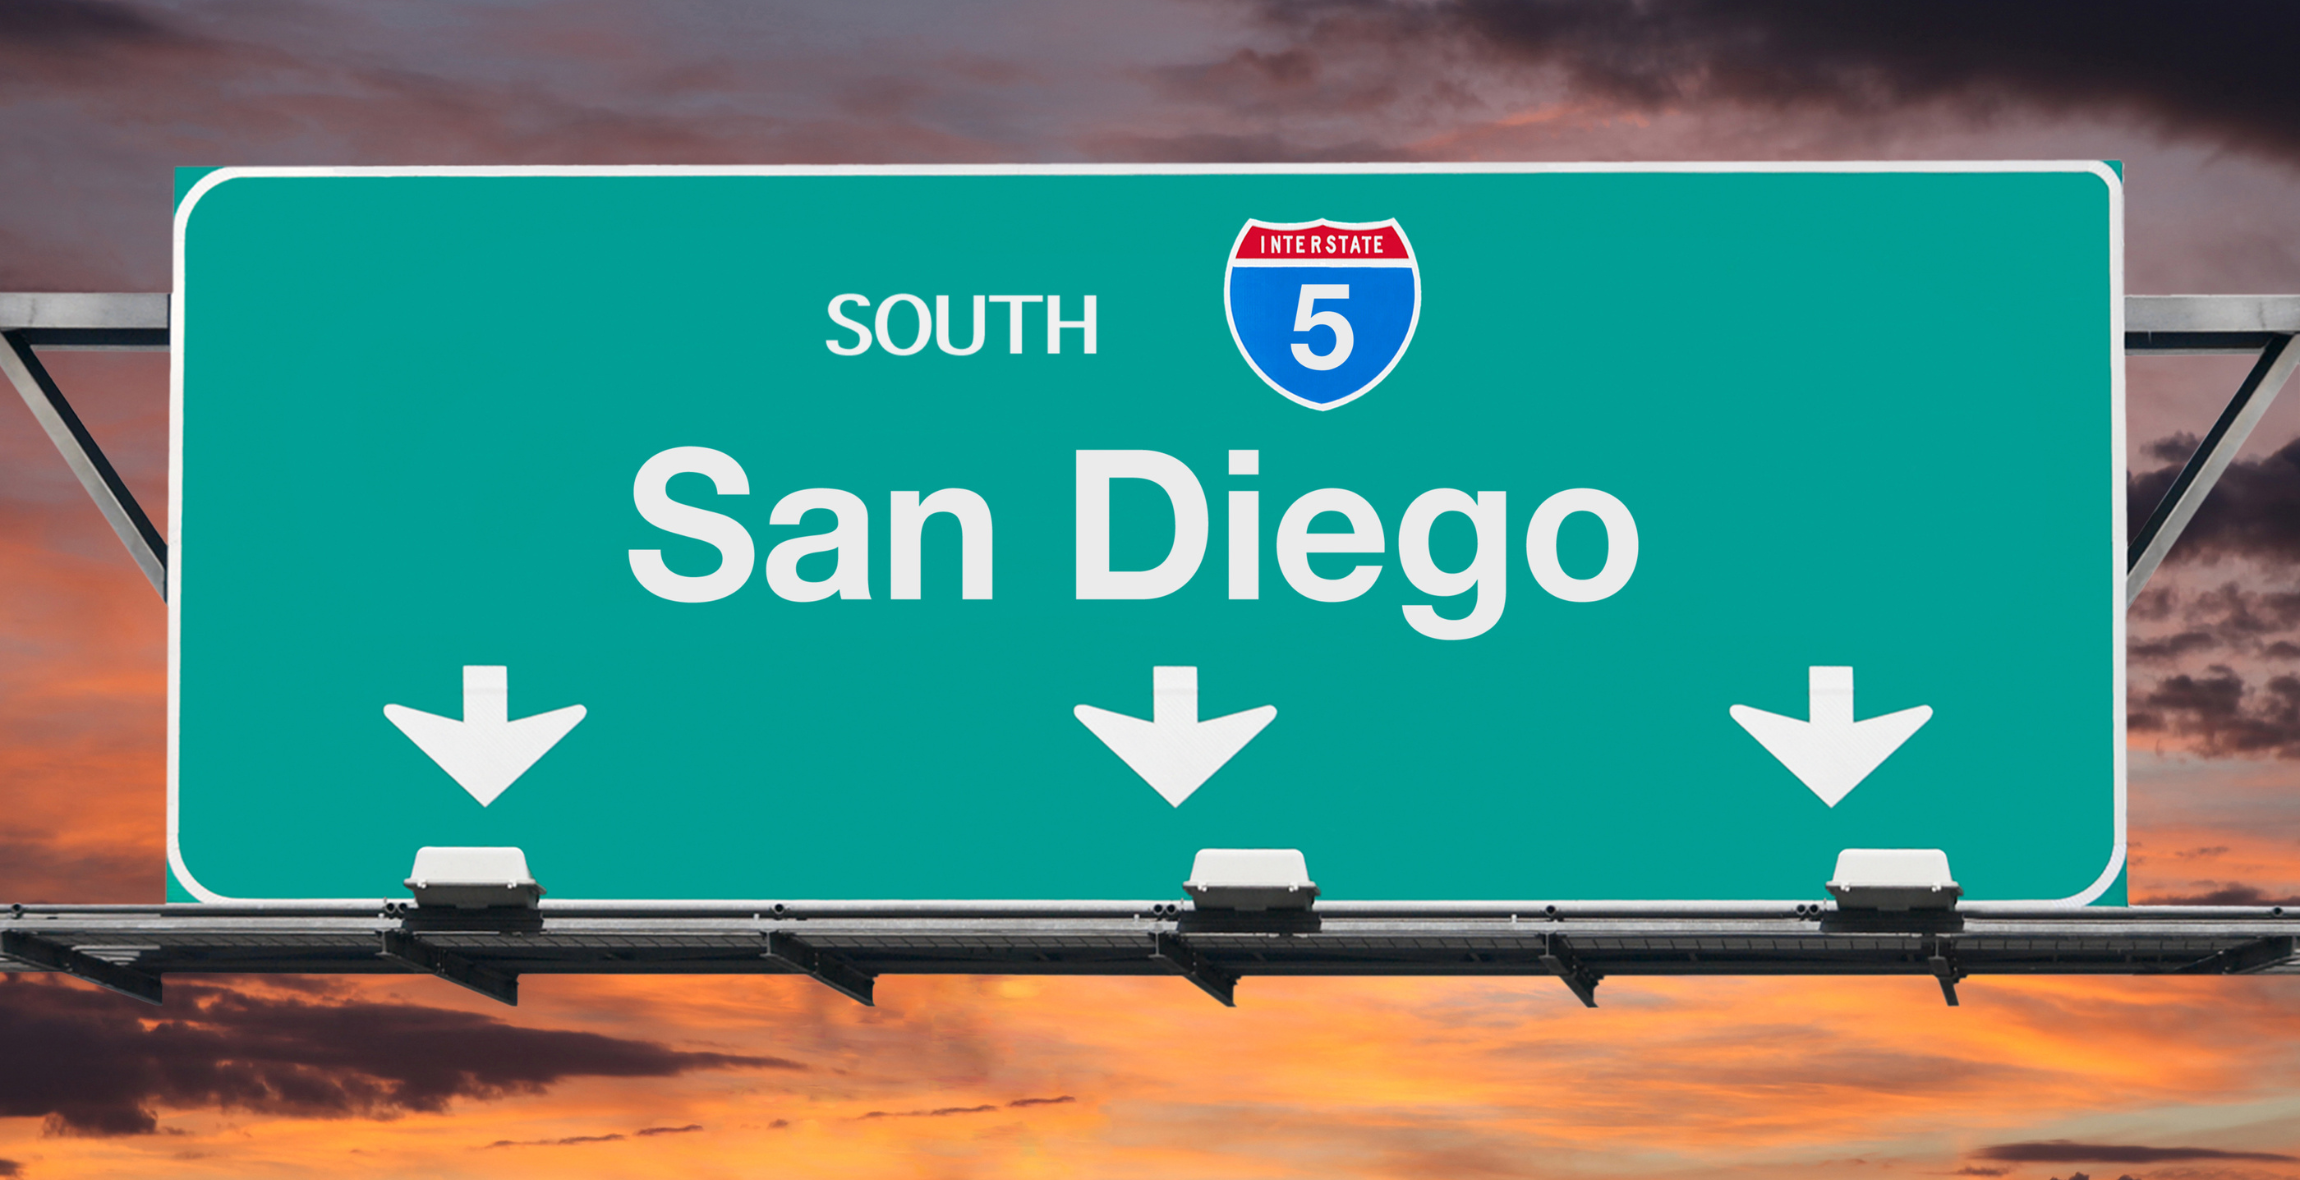 San Diego Interstate sign in front of sunset